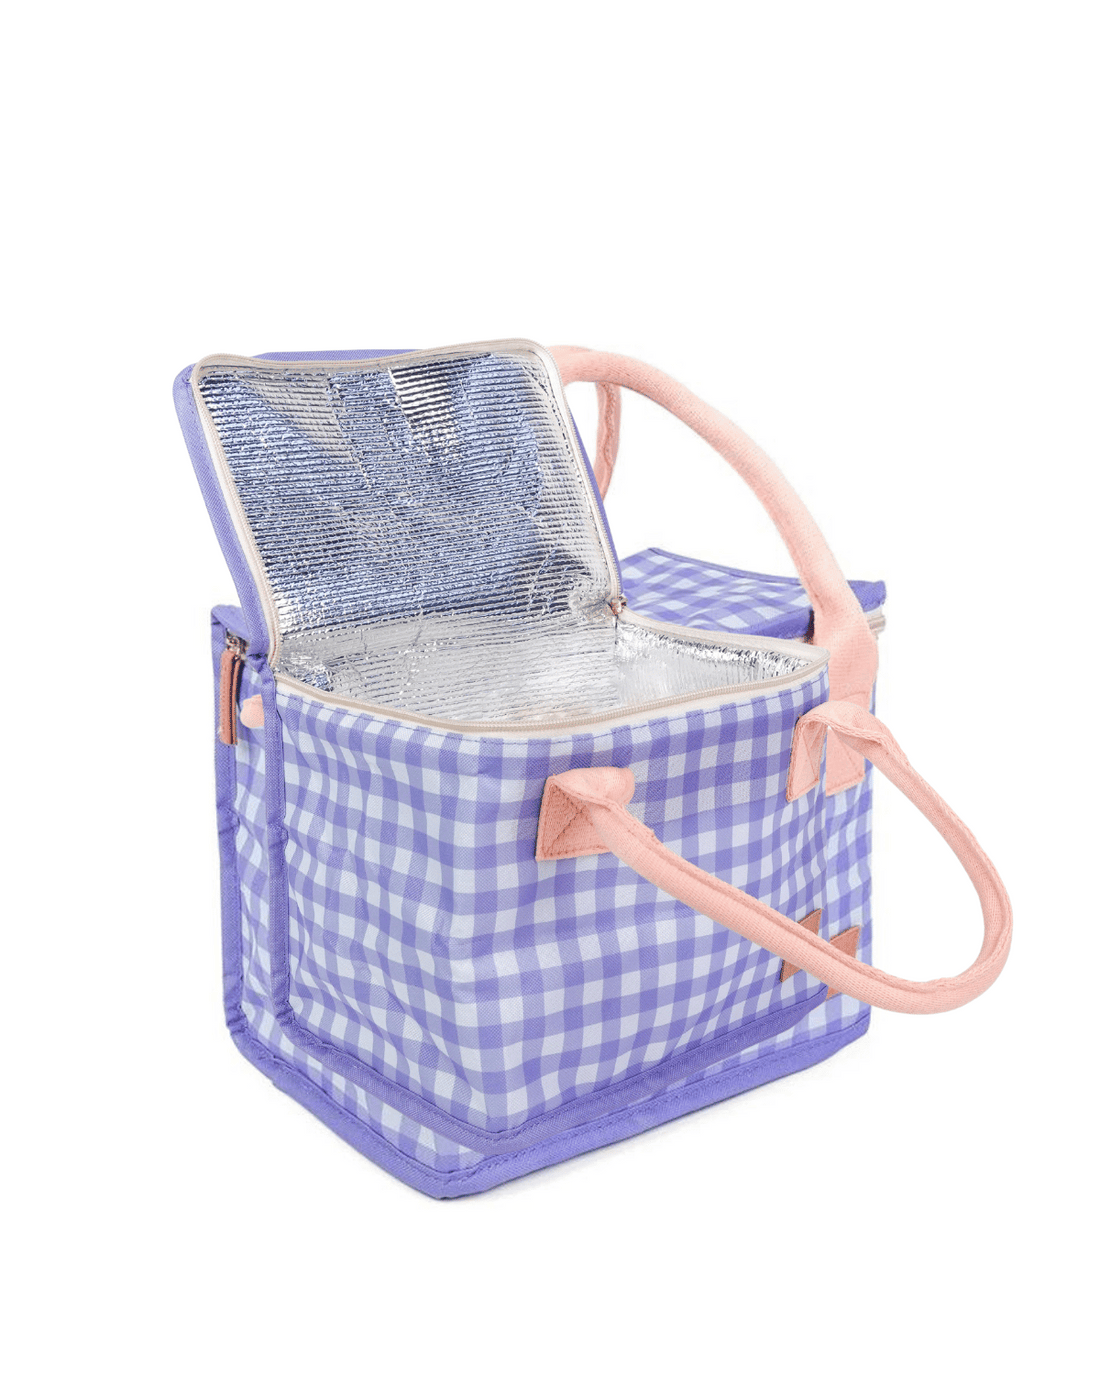 Lunch Cooler Bag - pretty pattern